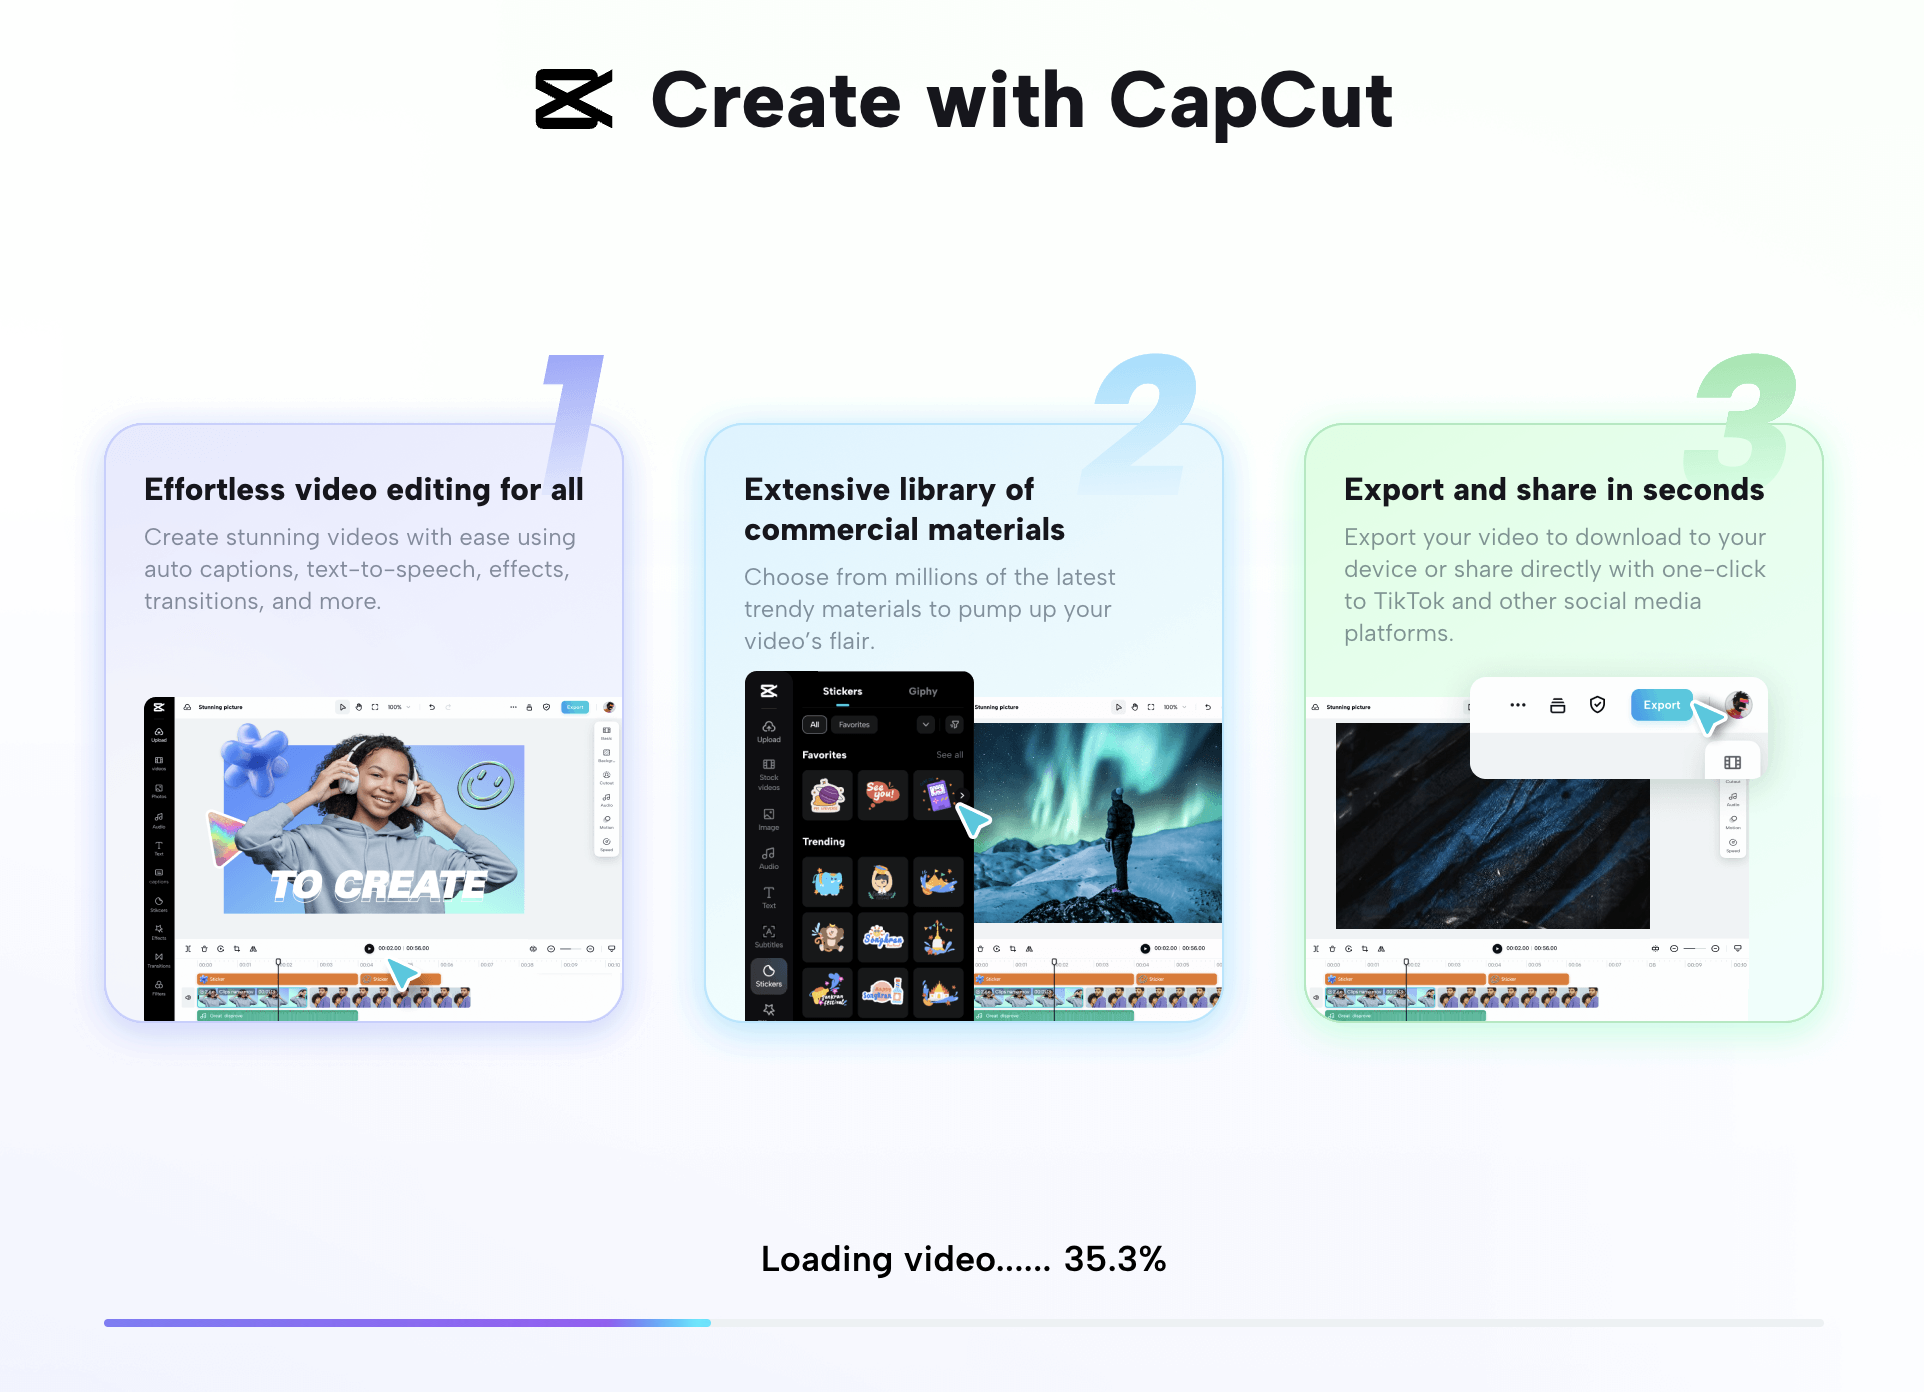 ByteDance Releases CapCut Plugin For ChatGPT